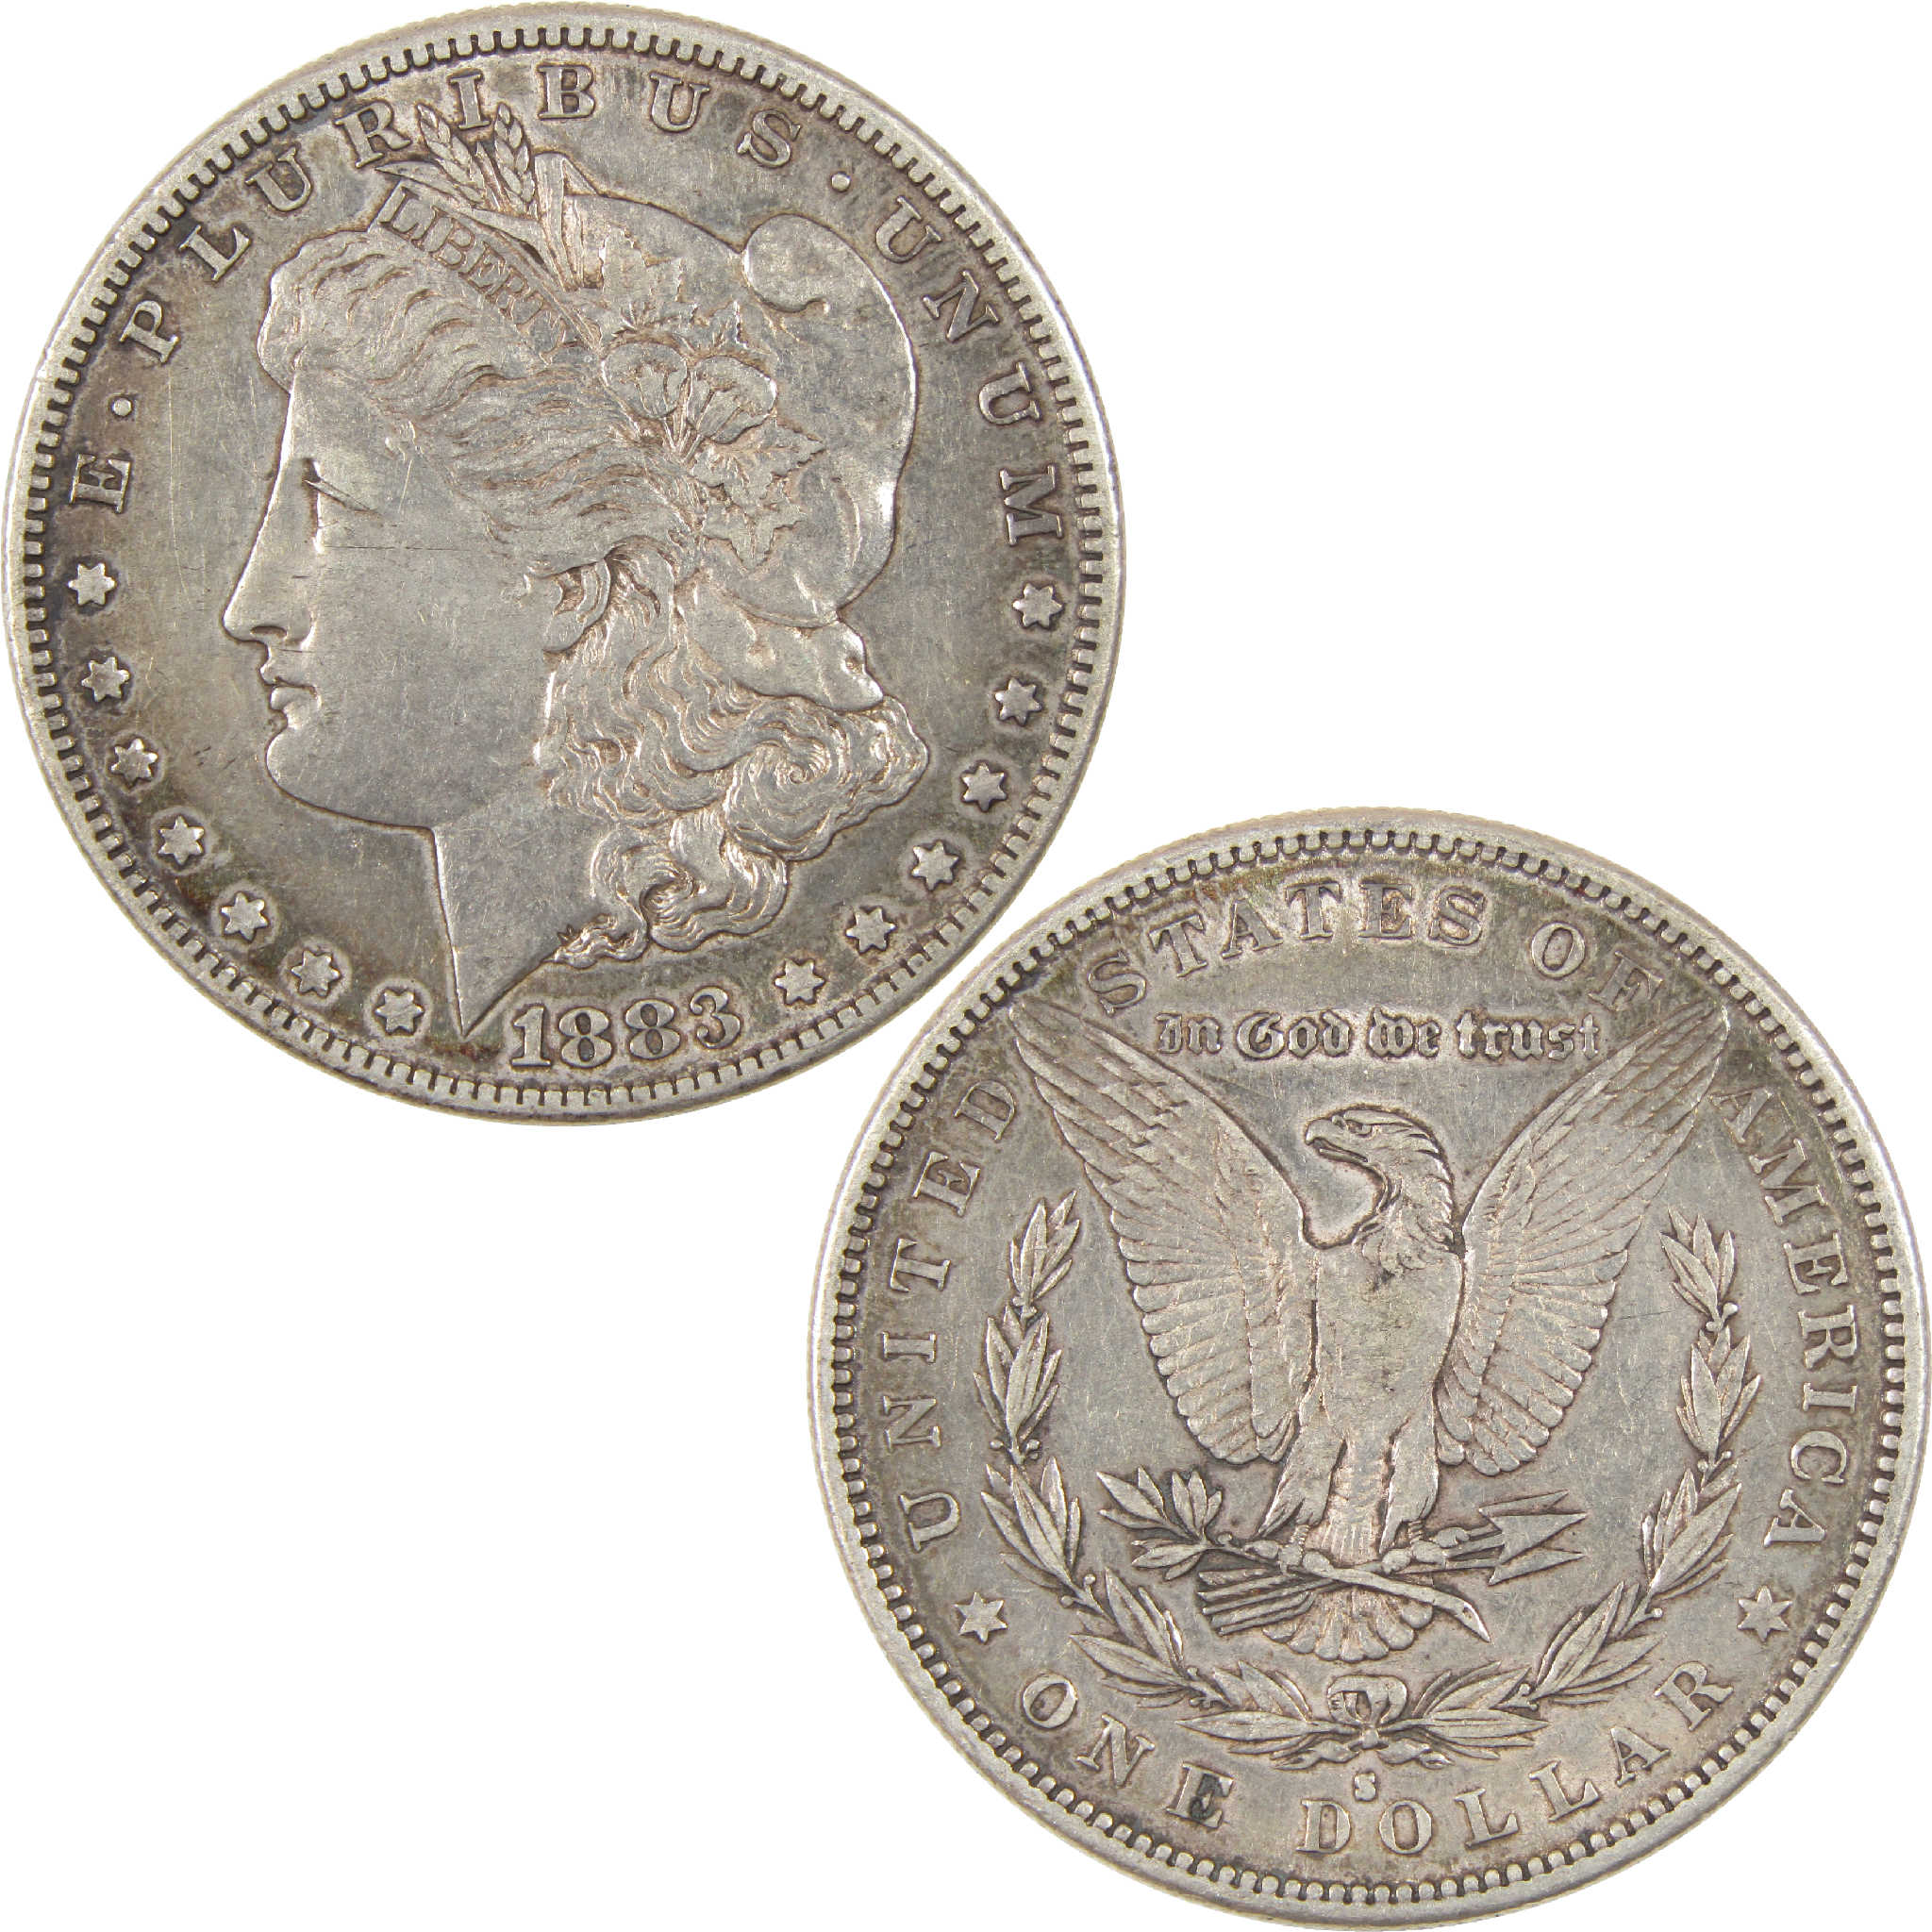 1883 S Morgan Dollar XF EF Extremely Fine Silver $1 Coin SKU:I11280 - Morgan coin - Morgan silver dollar - Morgan silver dollar for sale - Profile Coins &amp; Collectibles